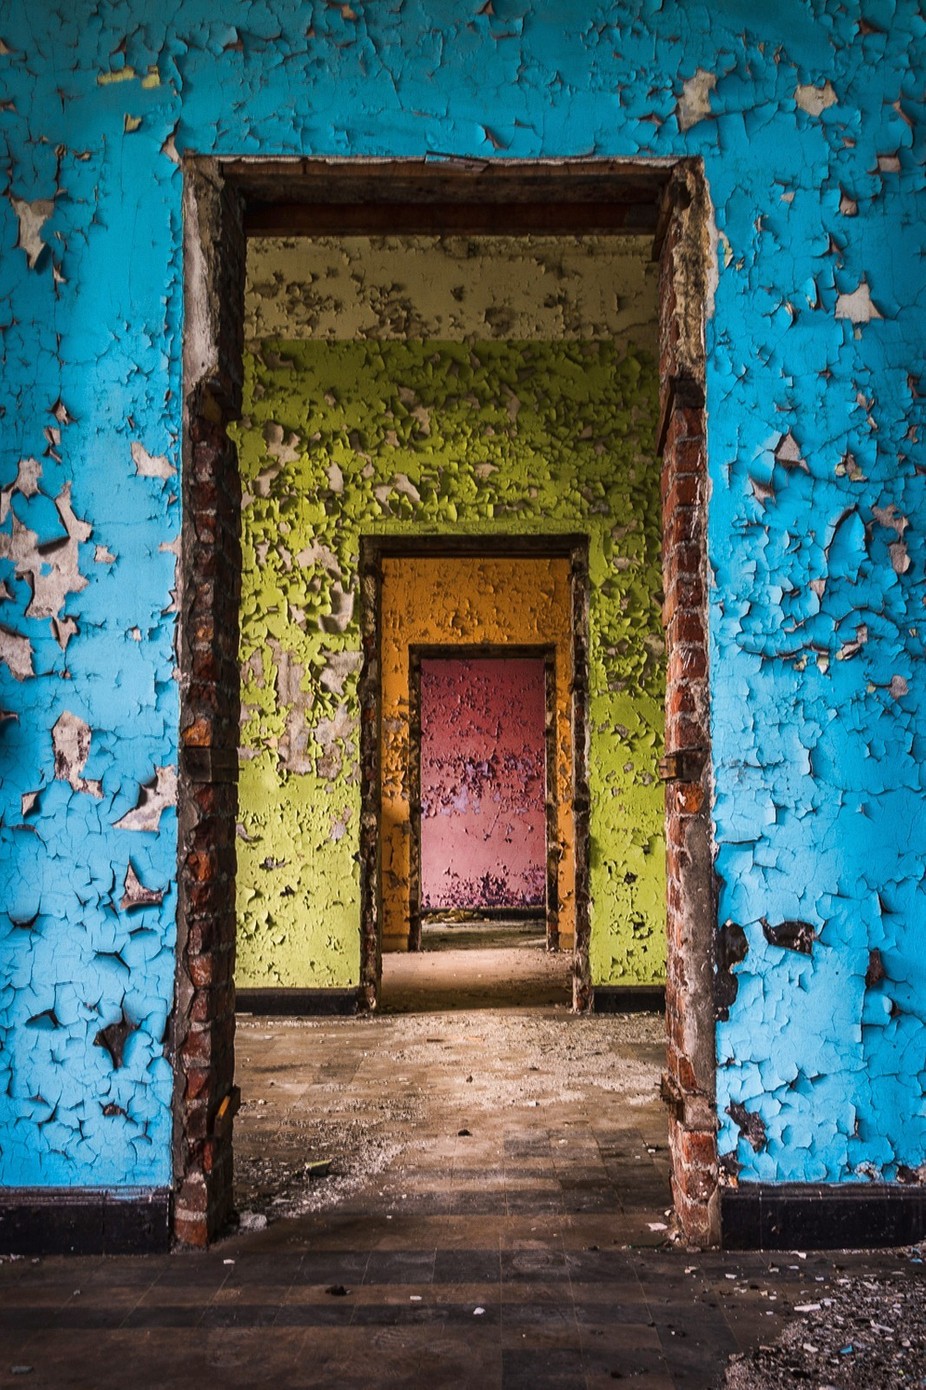 Prison 11 Doors by stefgoovaerts - The Colors Photo Contest